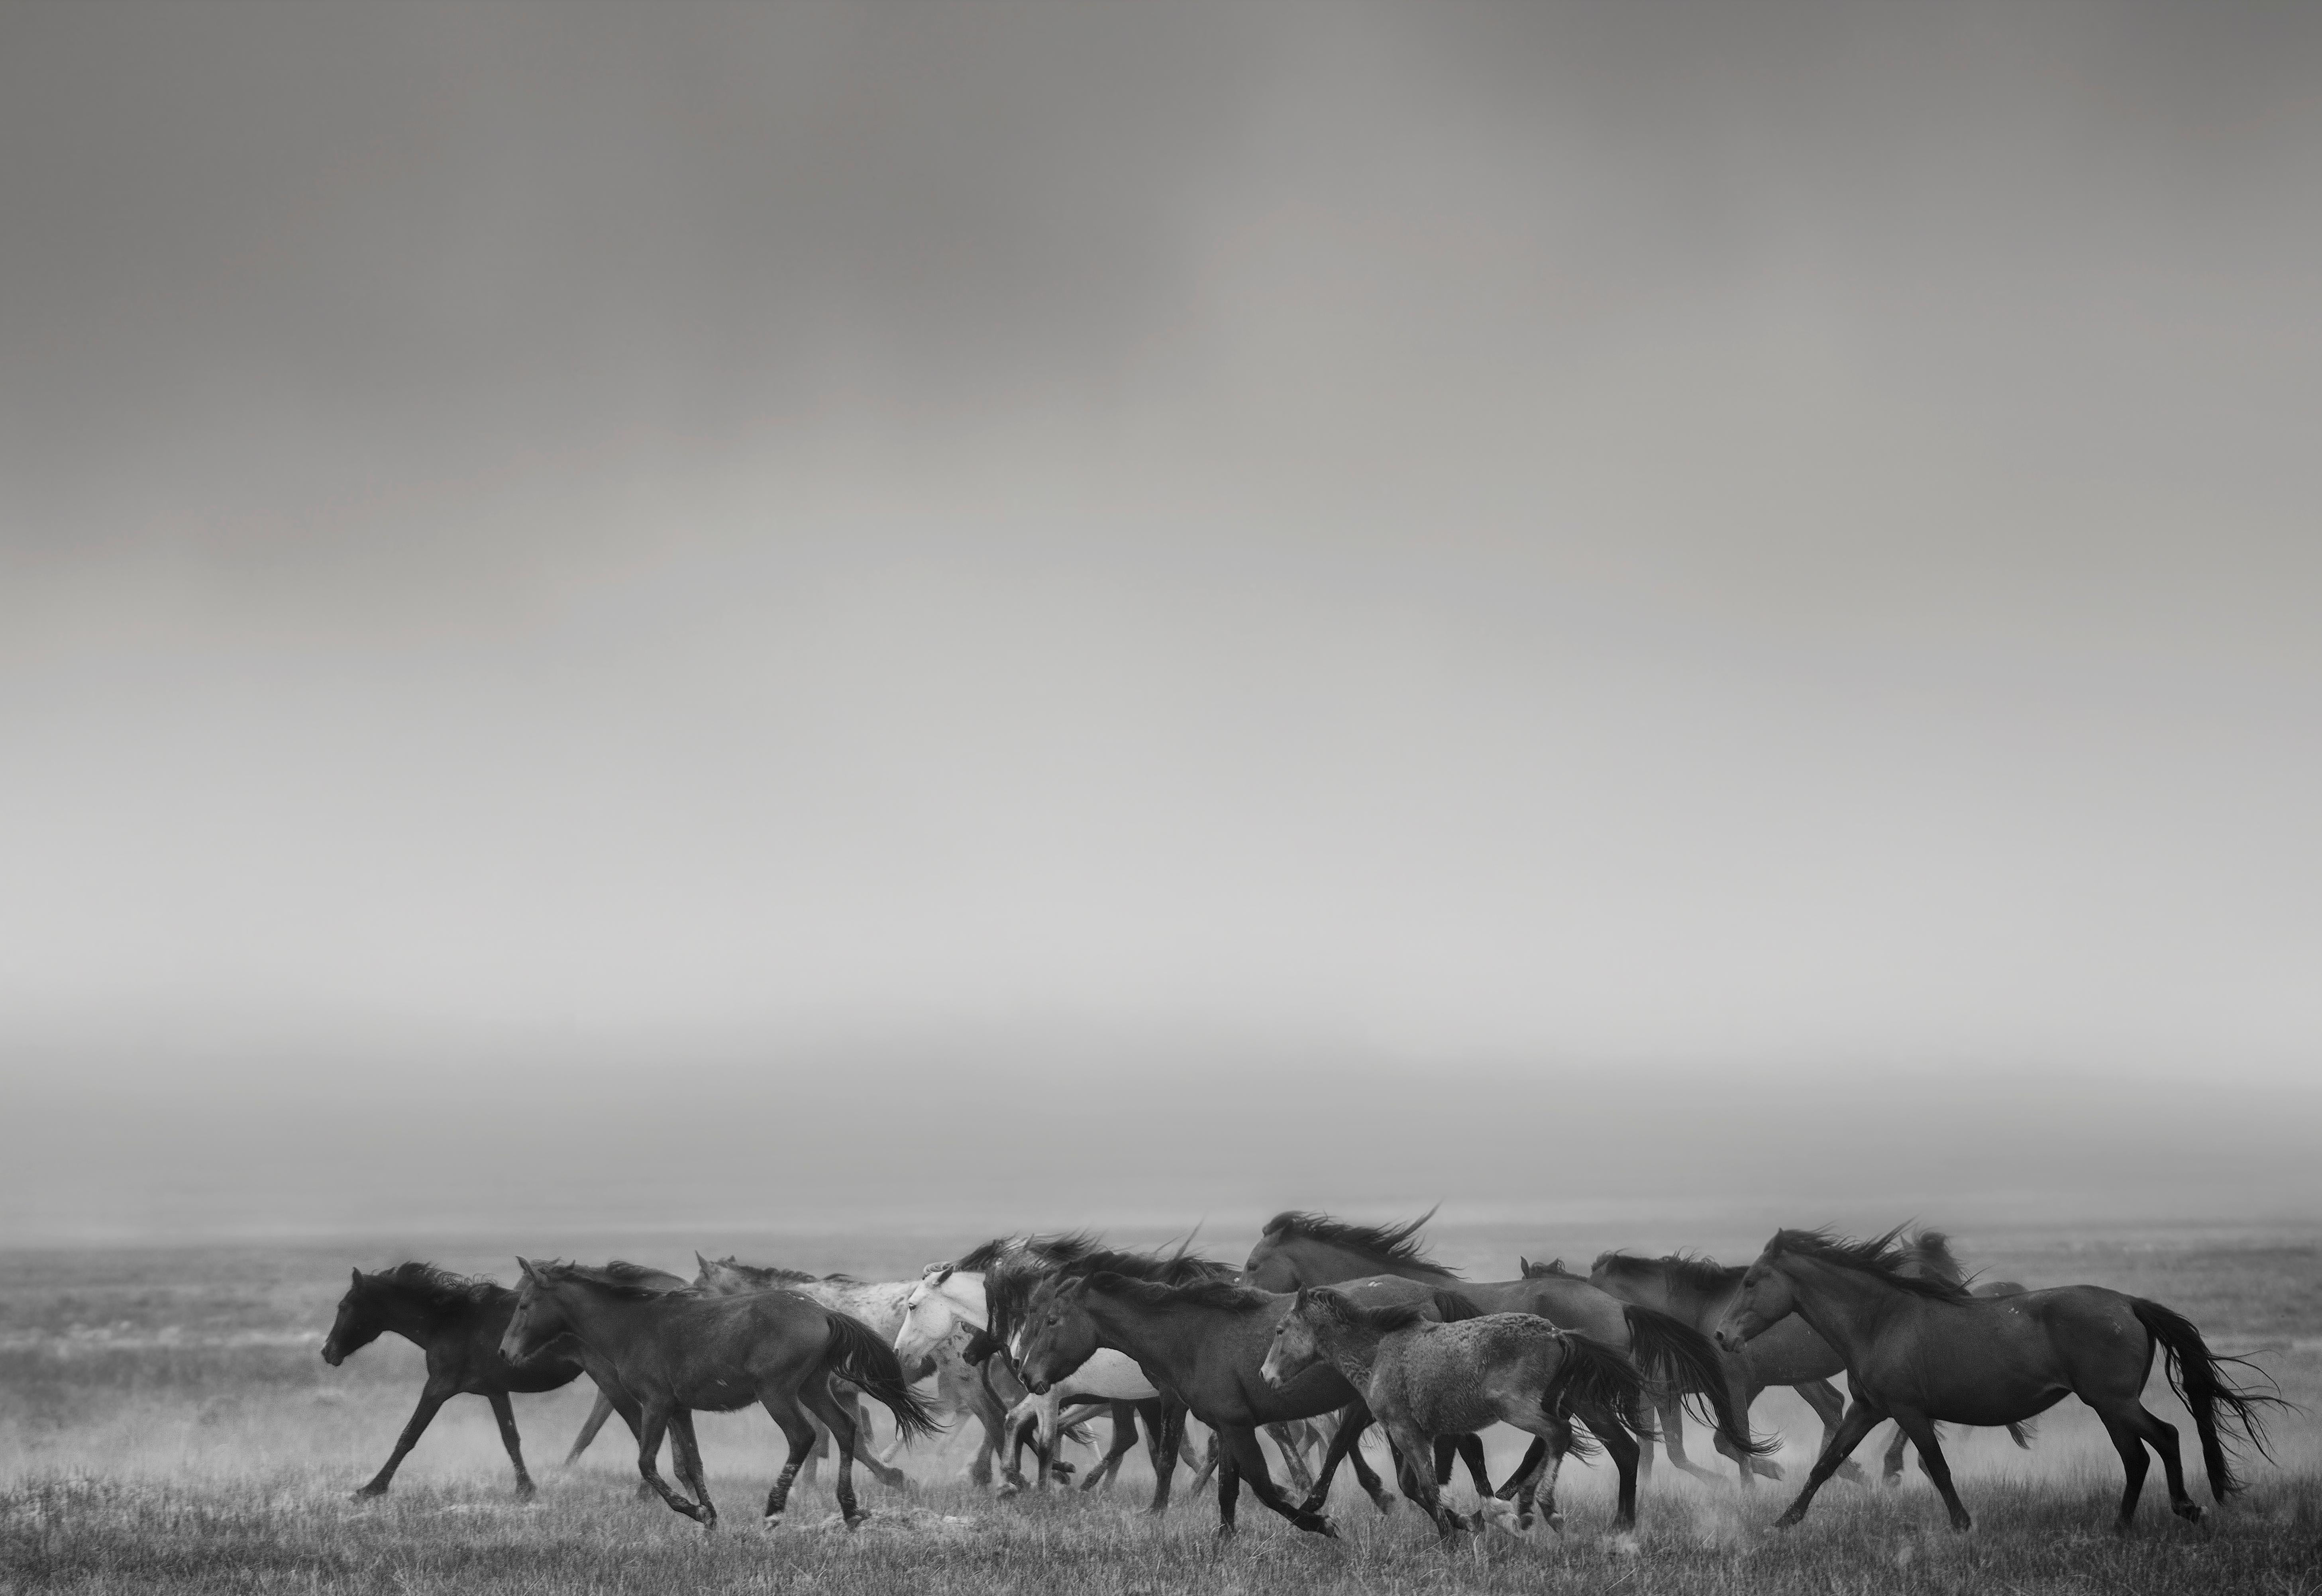 Shane Russeck Animal Print - "Dream State" - 40x50 Black and White Photography Wild Horses Mustangs Unsigned 